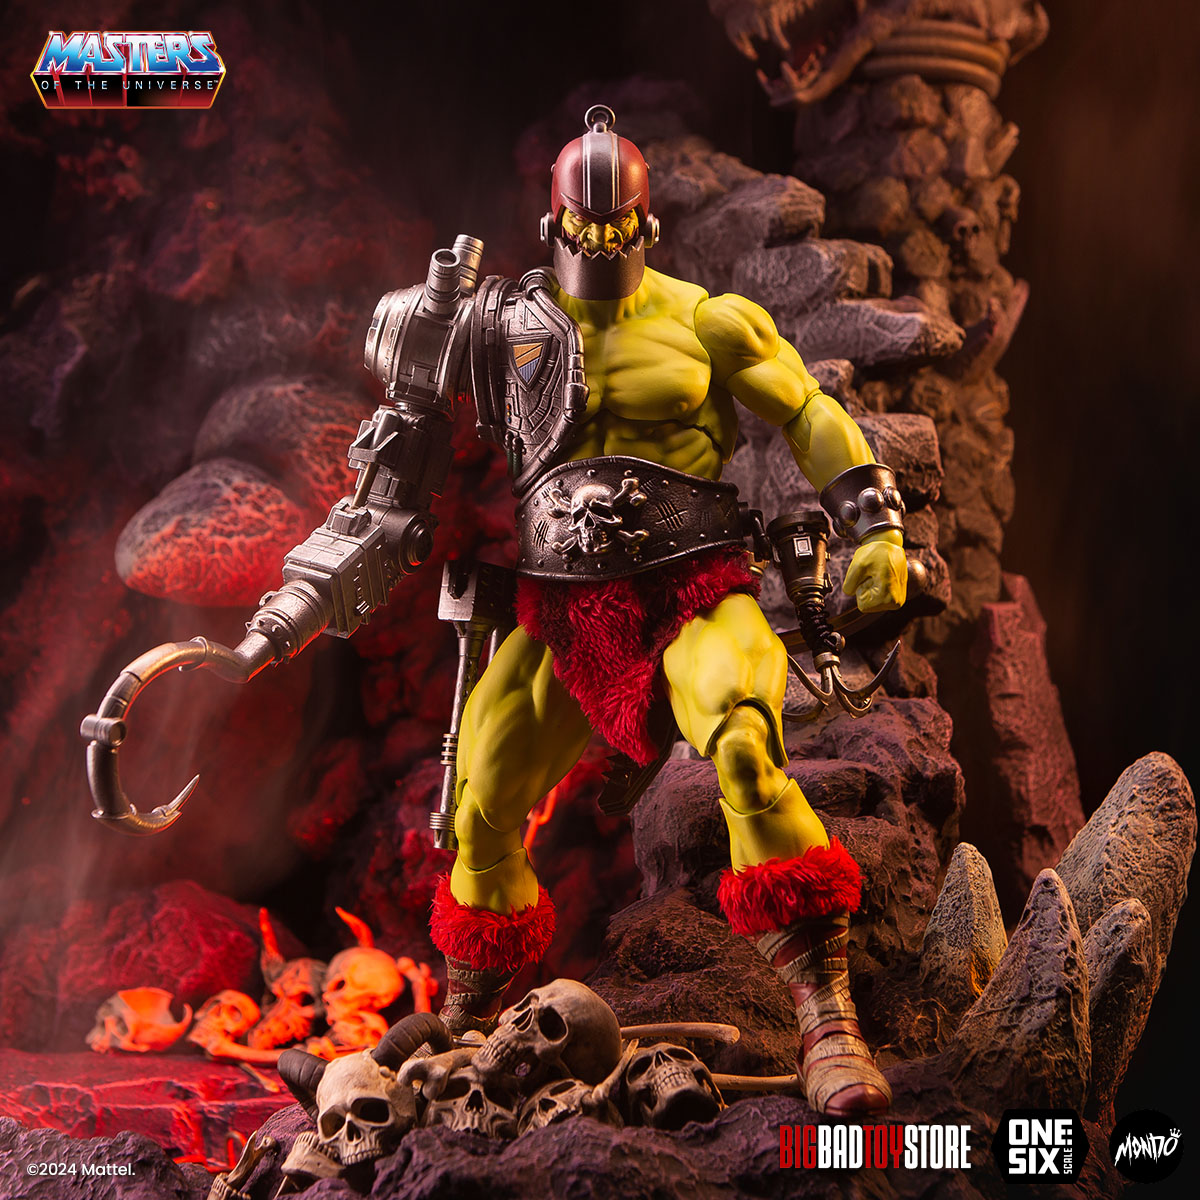 Masters of the Universe Trap Jaw (Mini Comic Ver.) 1/6 Scale BBTS Exclusive Limited Edition Figure available for pre-order!

bit.ly/3Ughv1w
#trapjaw #mastersoftheuniverse #limitededition #bigbadtoystore #bbts